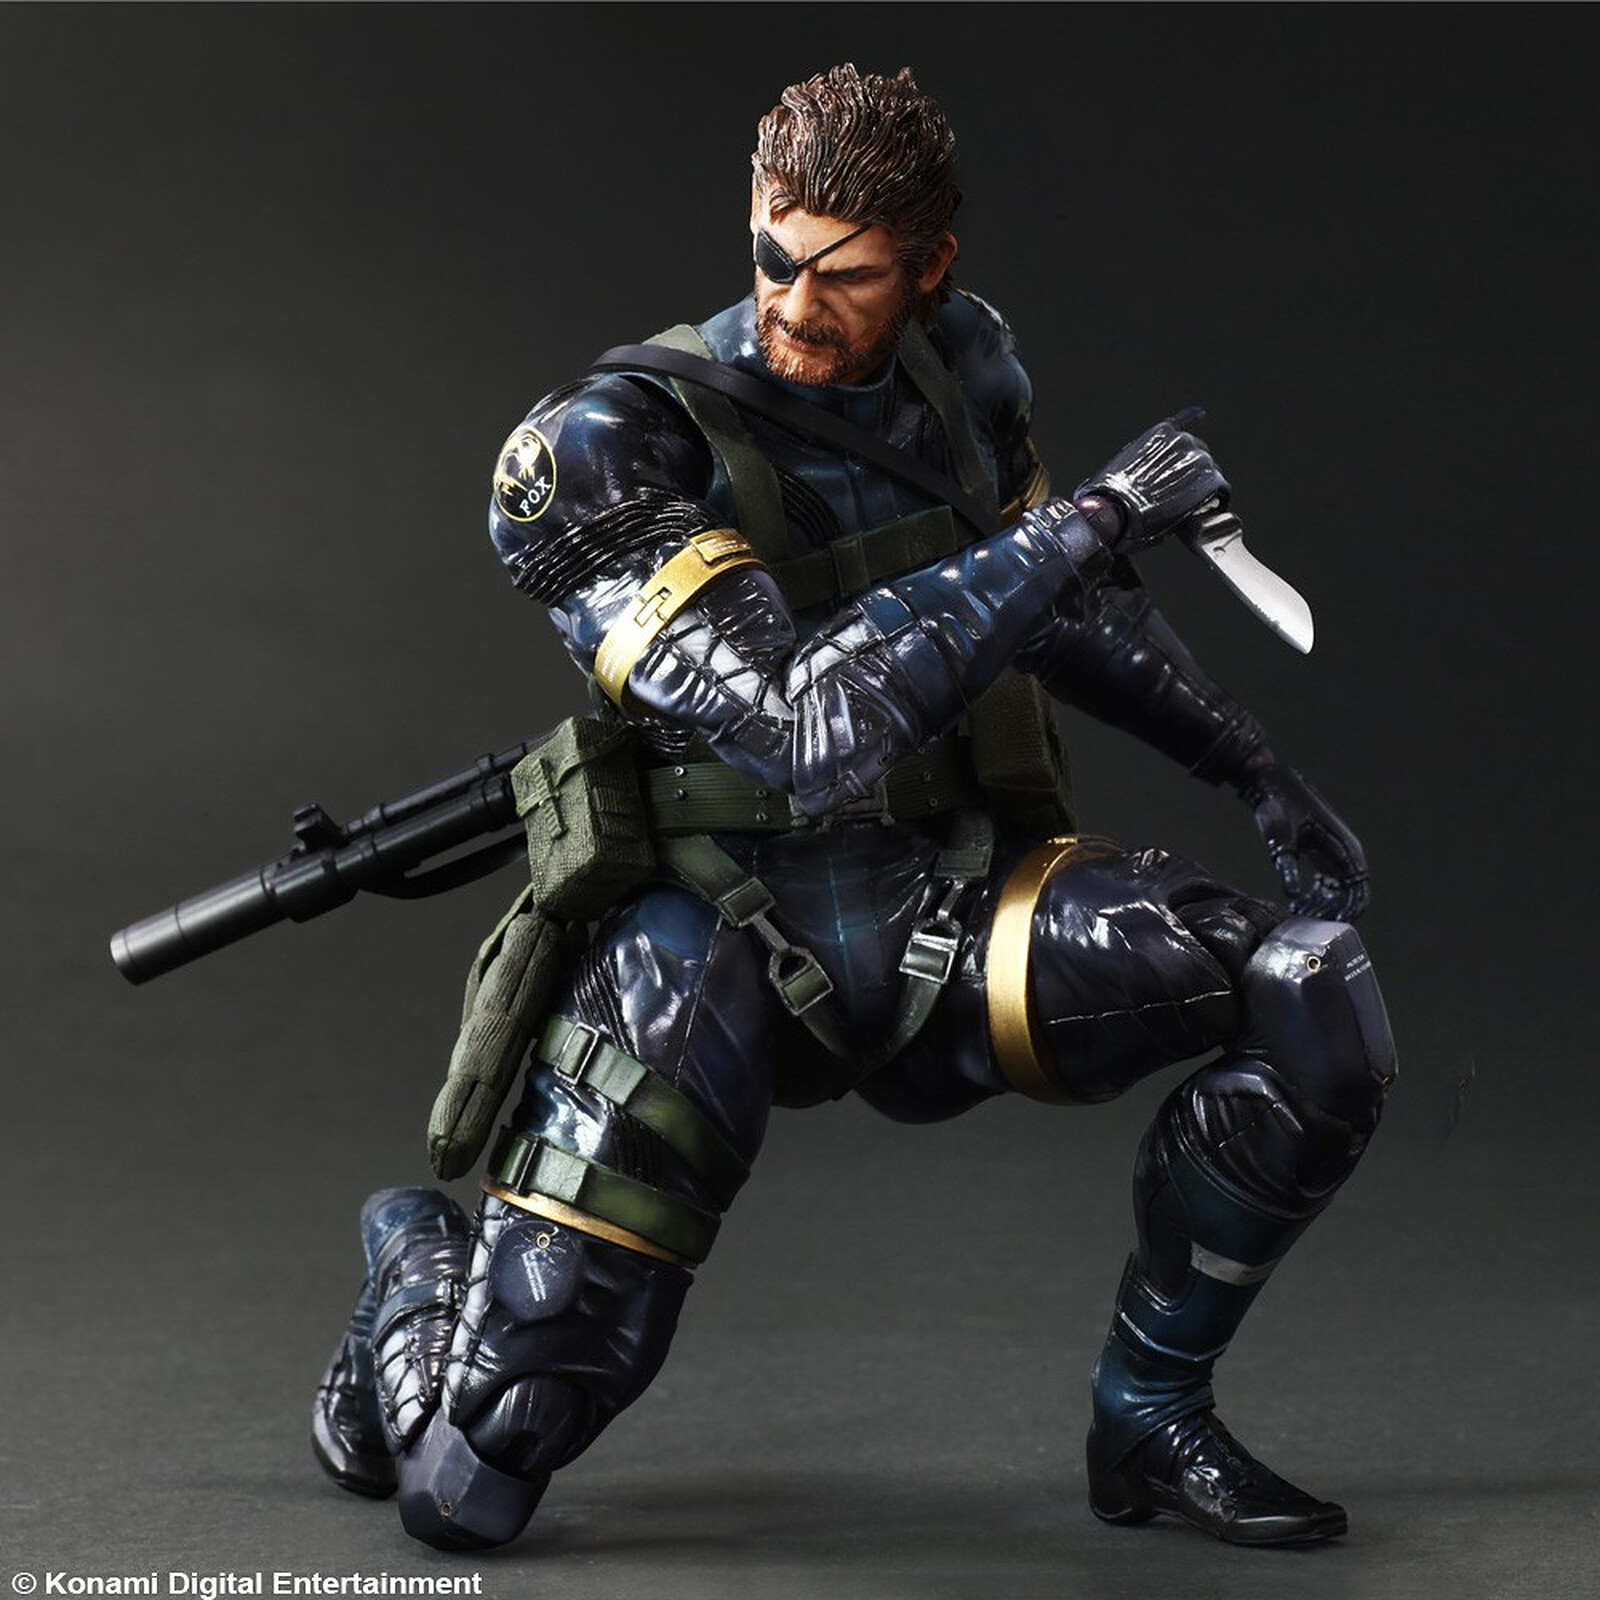 Metal Gear Solid 5: Play Arts Kai Action Figures: Ground 